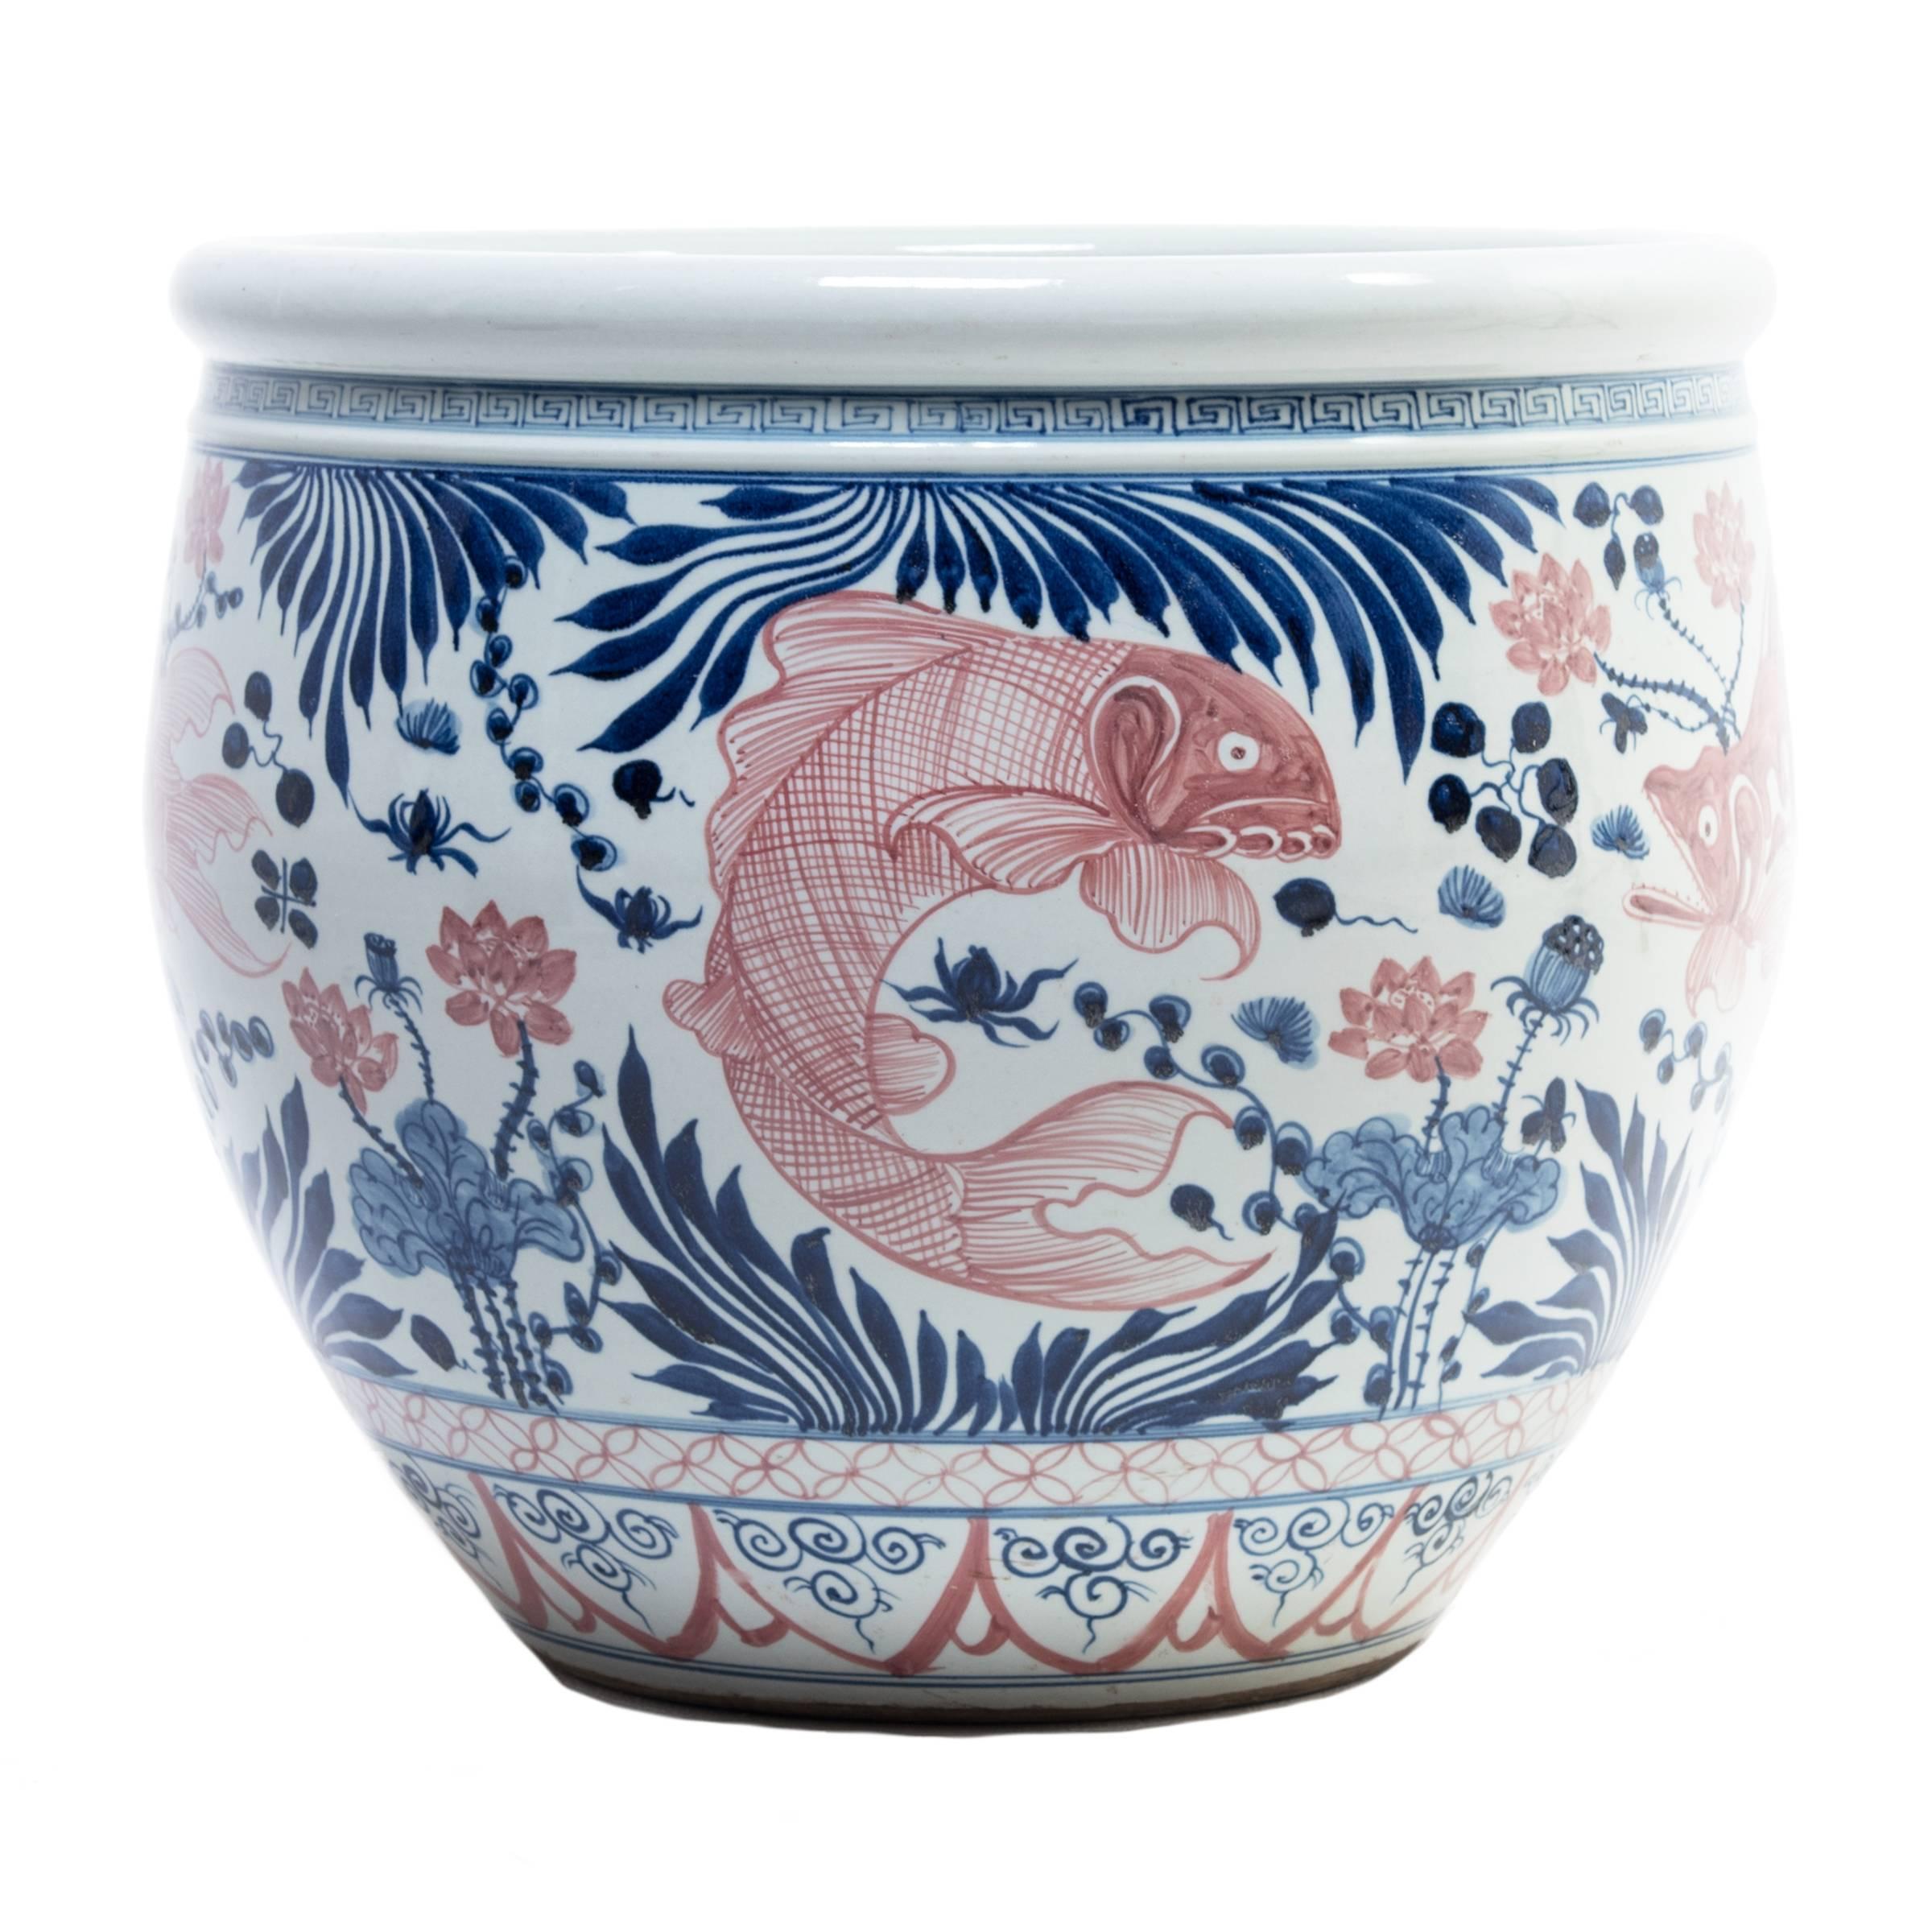 A modern artisan from China’s Zhejiang region made this ceramic basin, but the blue and white style is centuries older and reflects Classic Ming dynasty designs. The whimsical fish swimming among delicately painted cobalt blue plants and fronds is